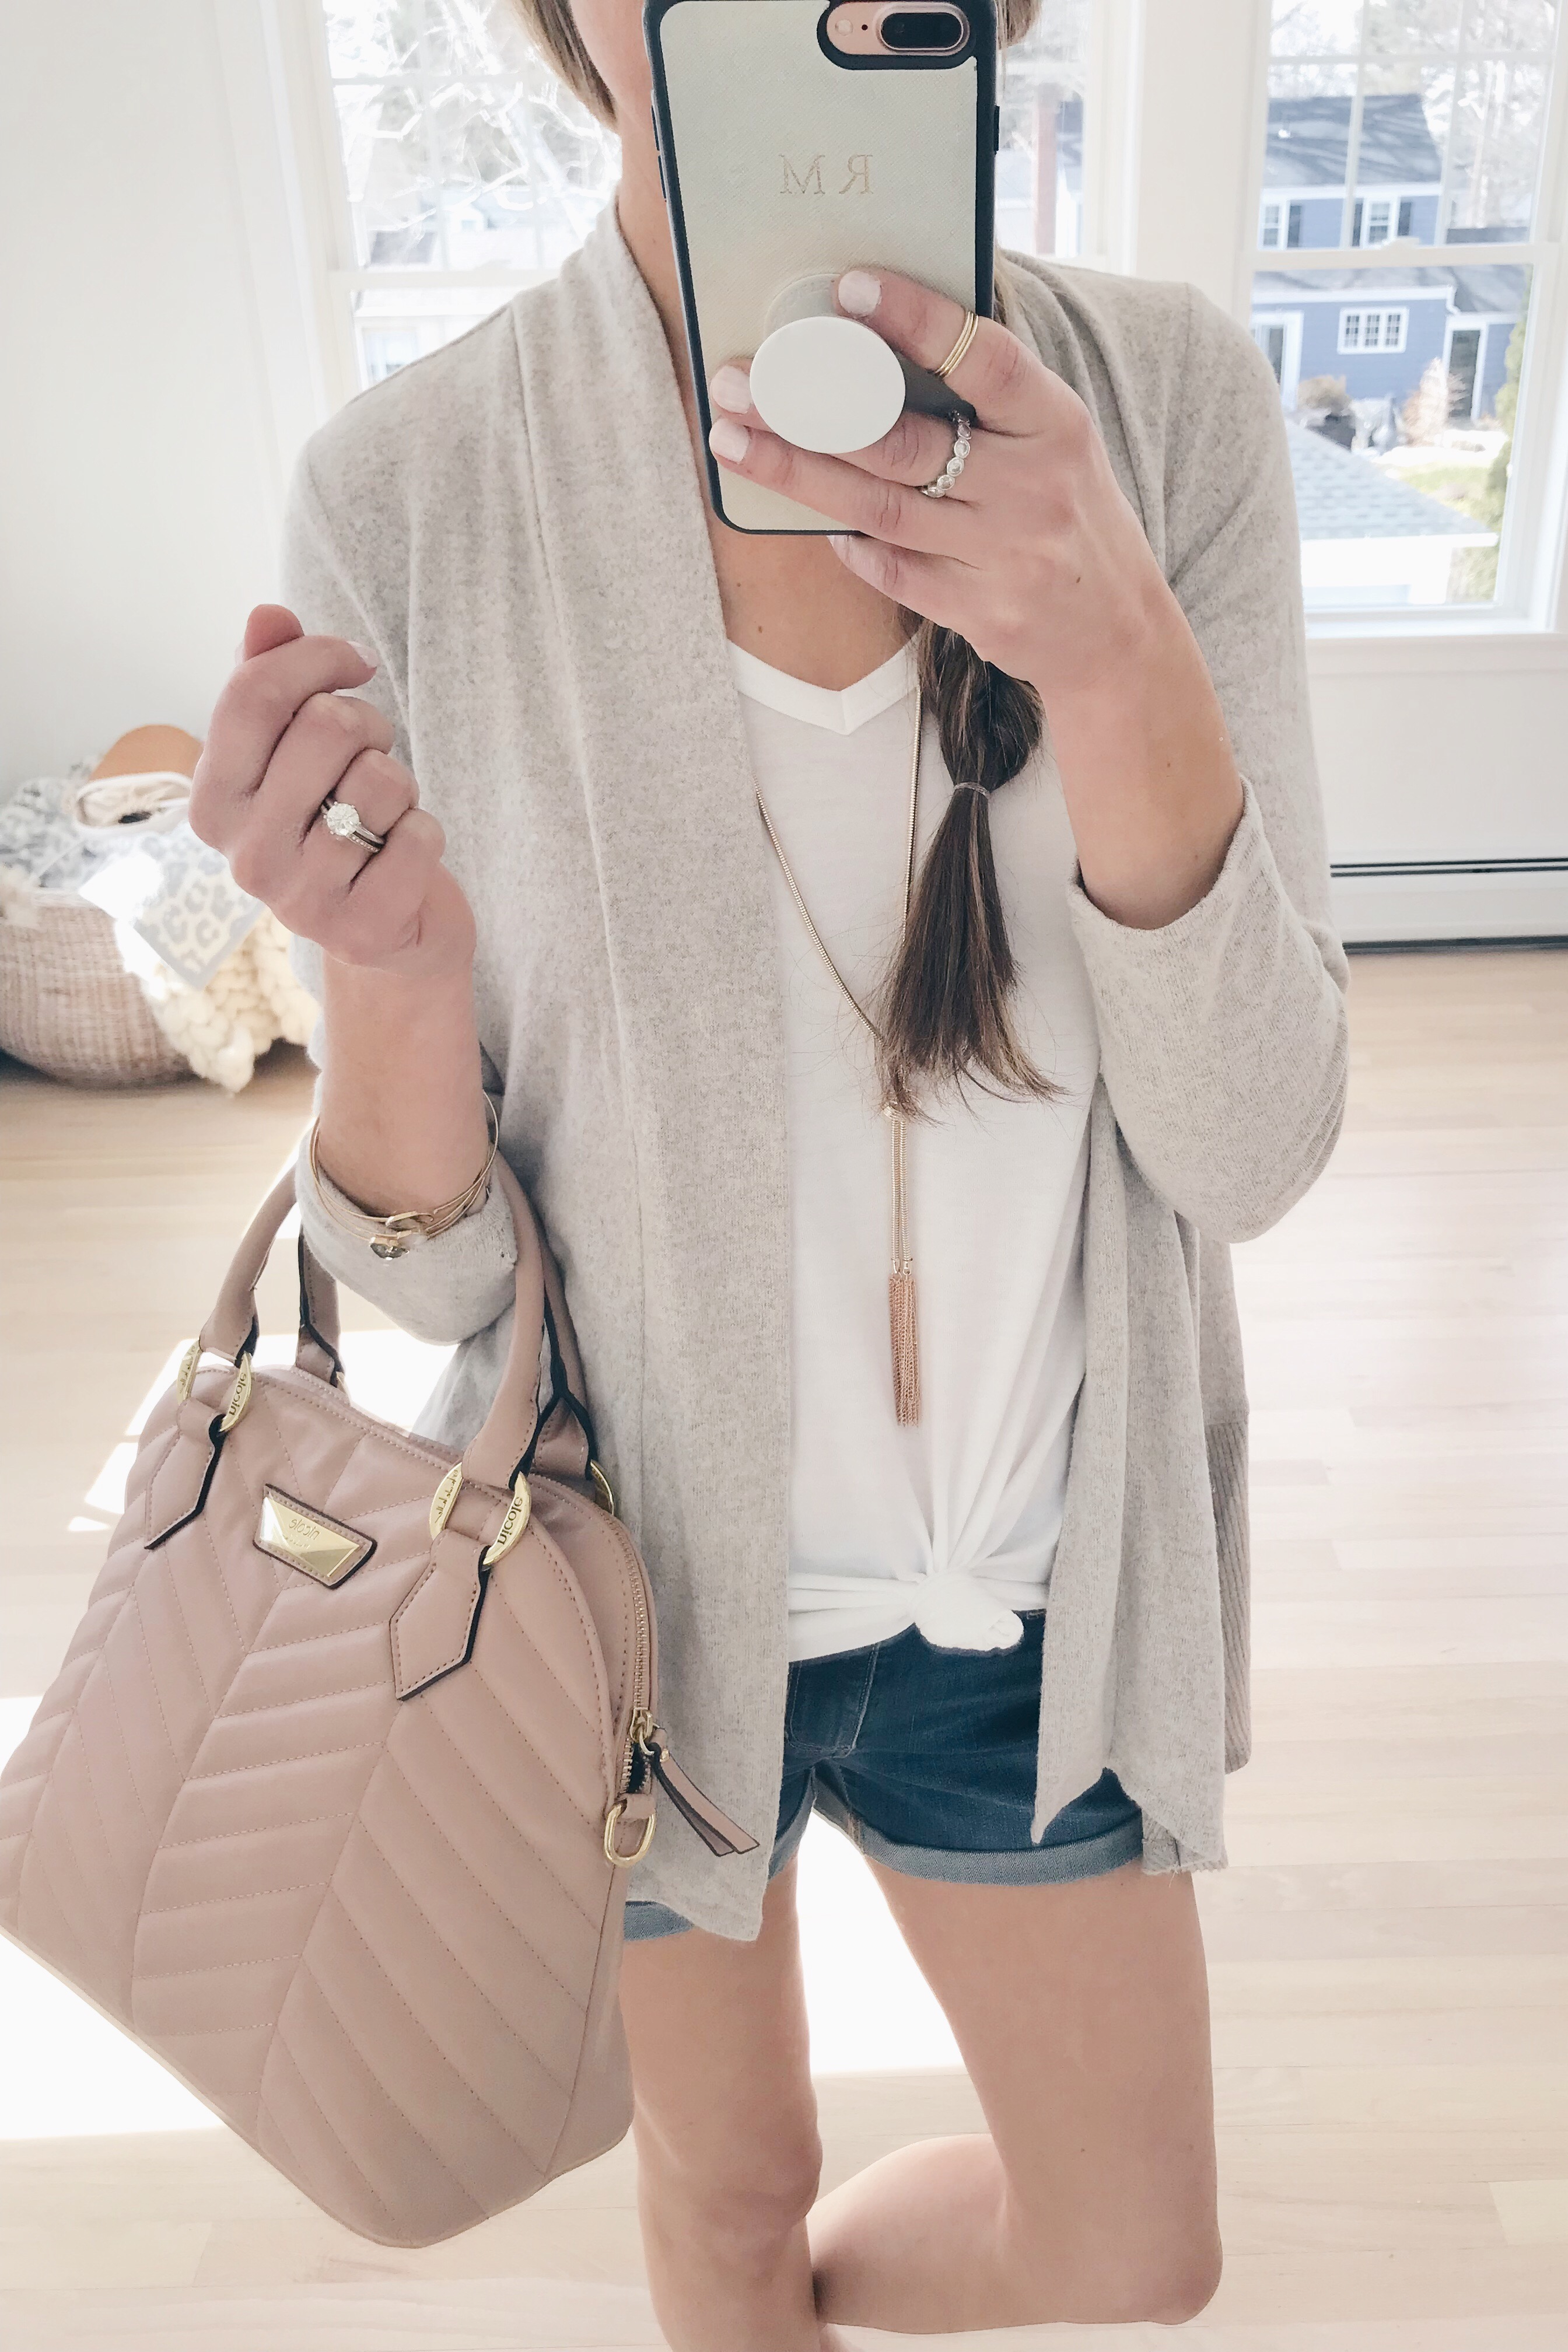 spring outfit ideas with jean shorts - spring outfits under $100